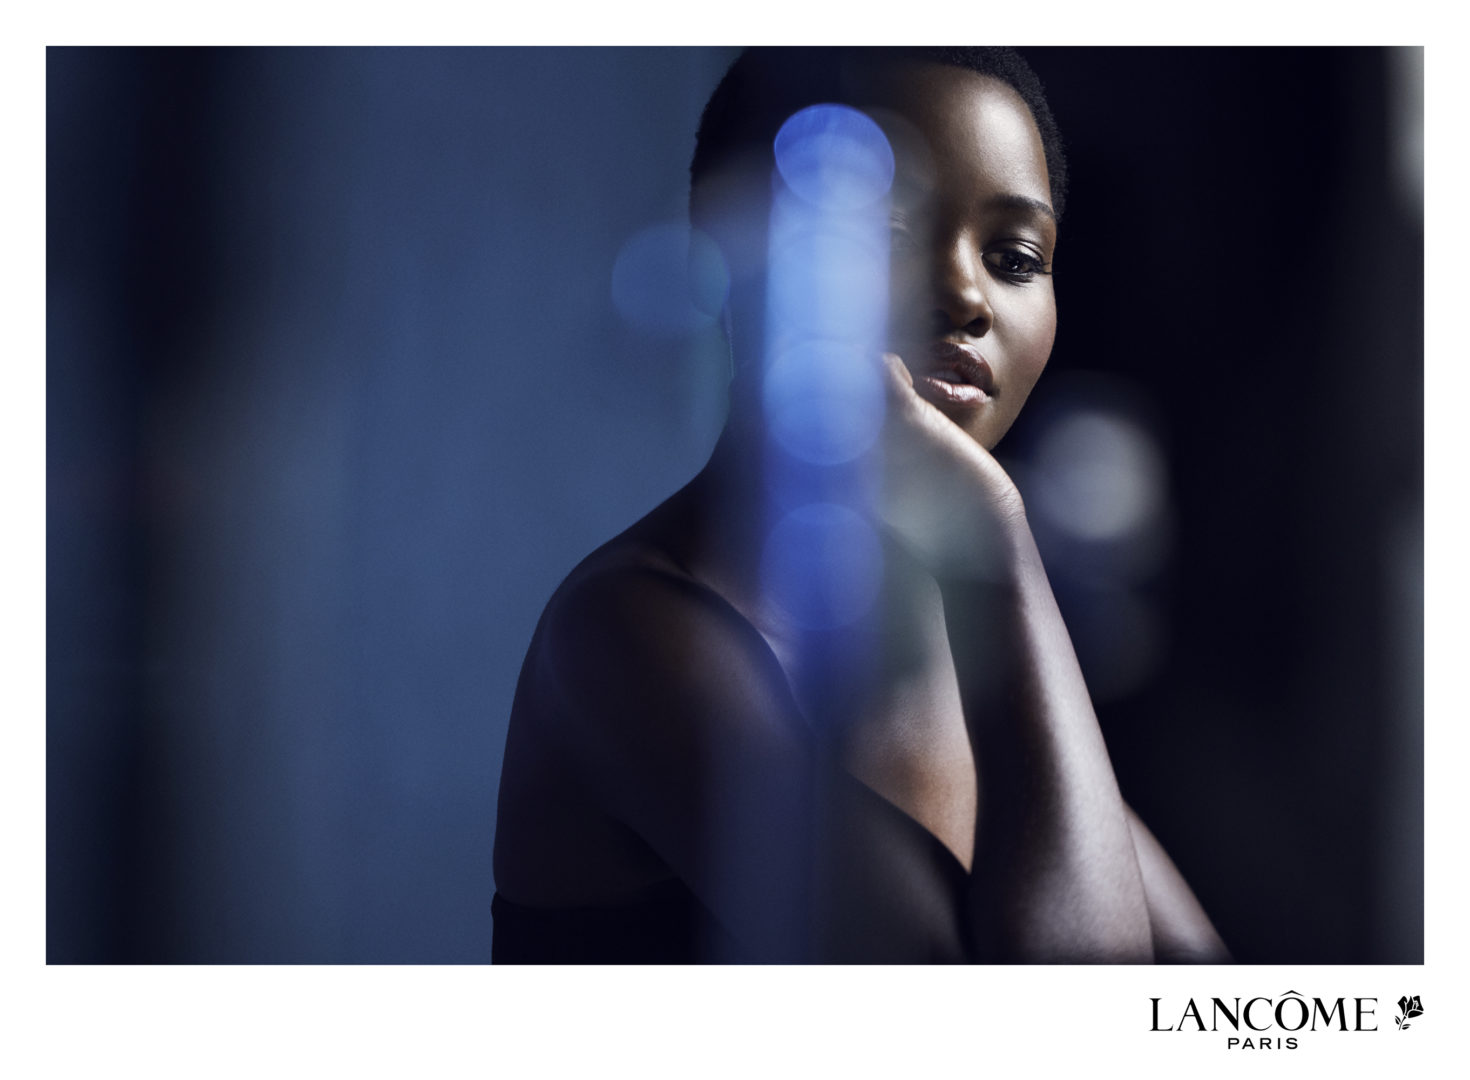 Beauty image for Lancome by Stefan Rappo